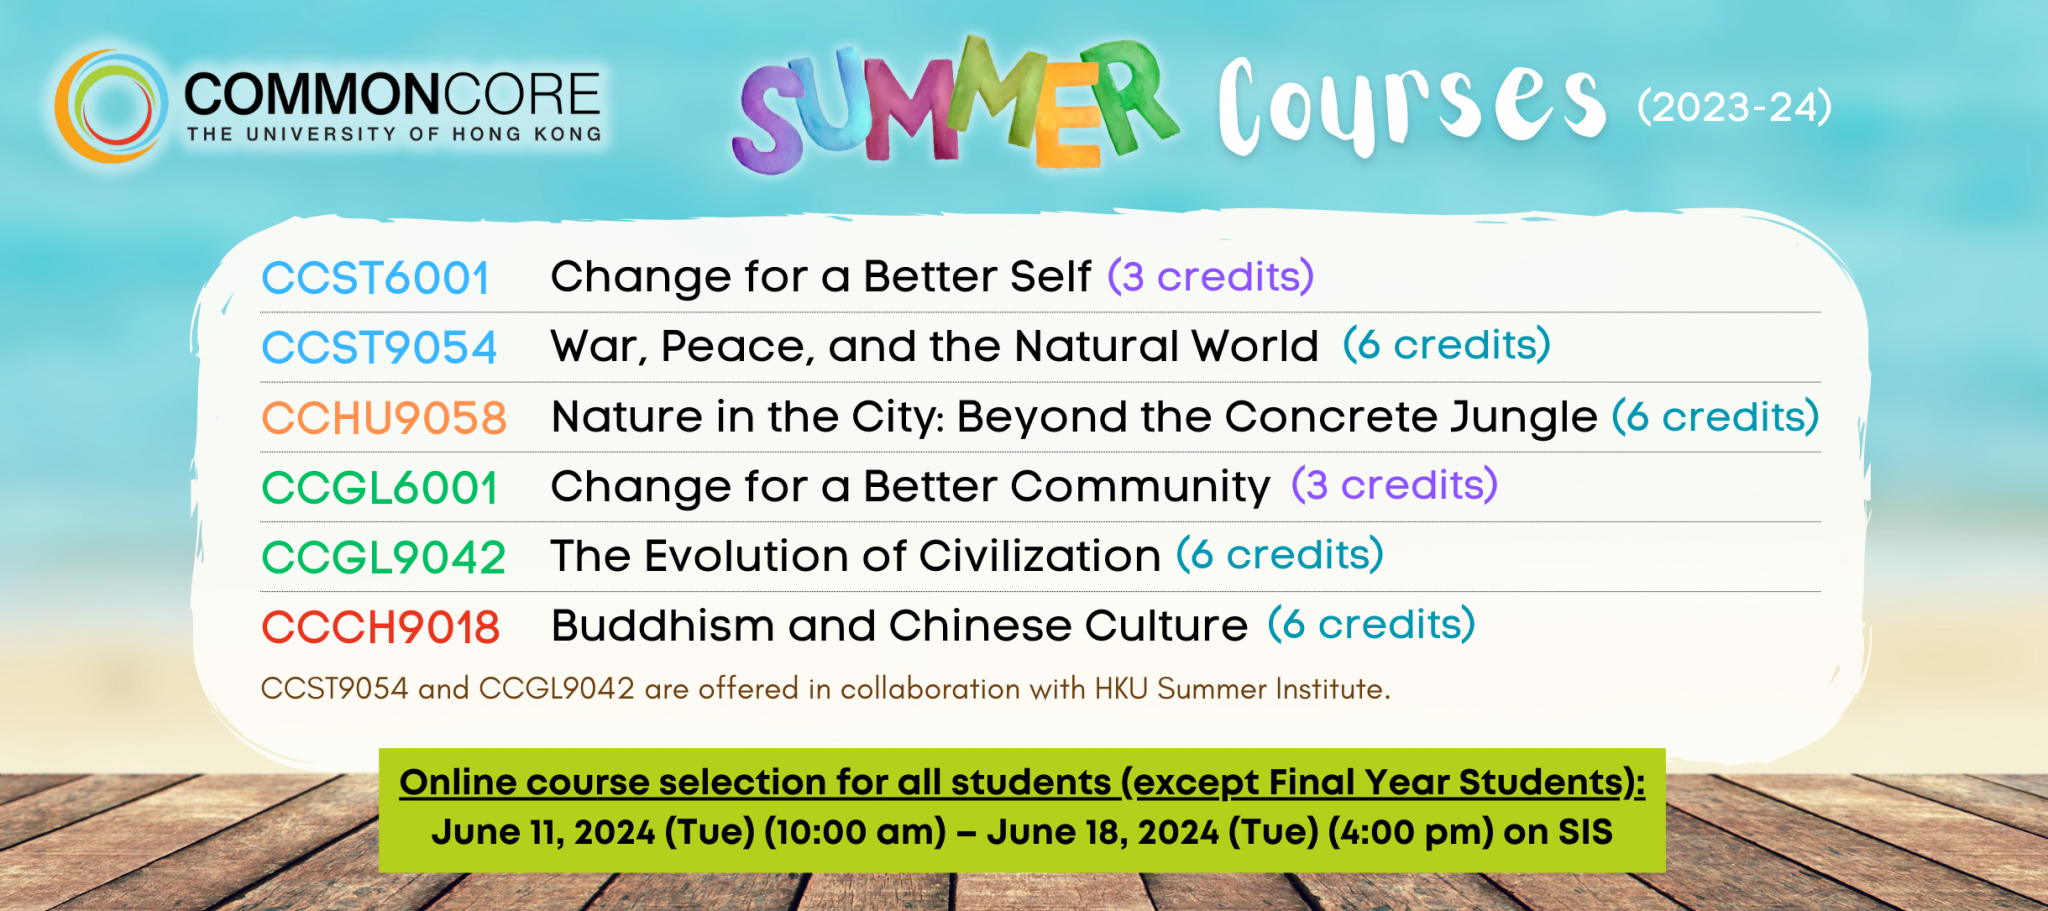 Summer Courses 2023-24